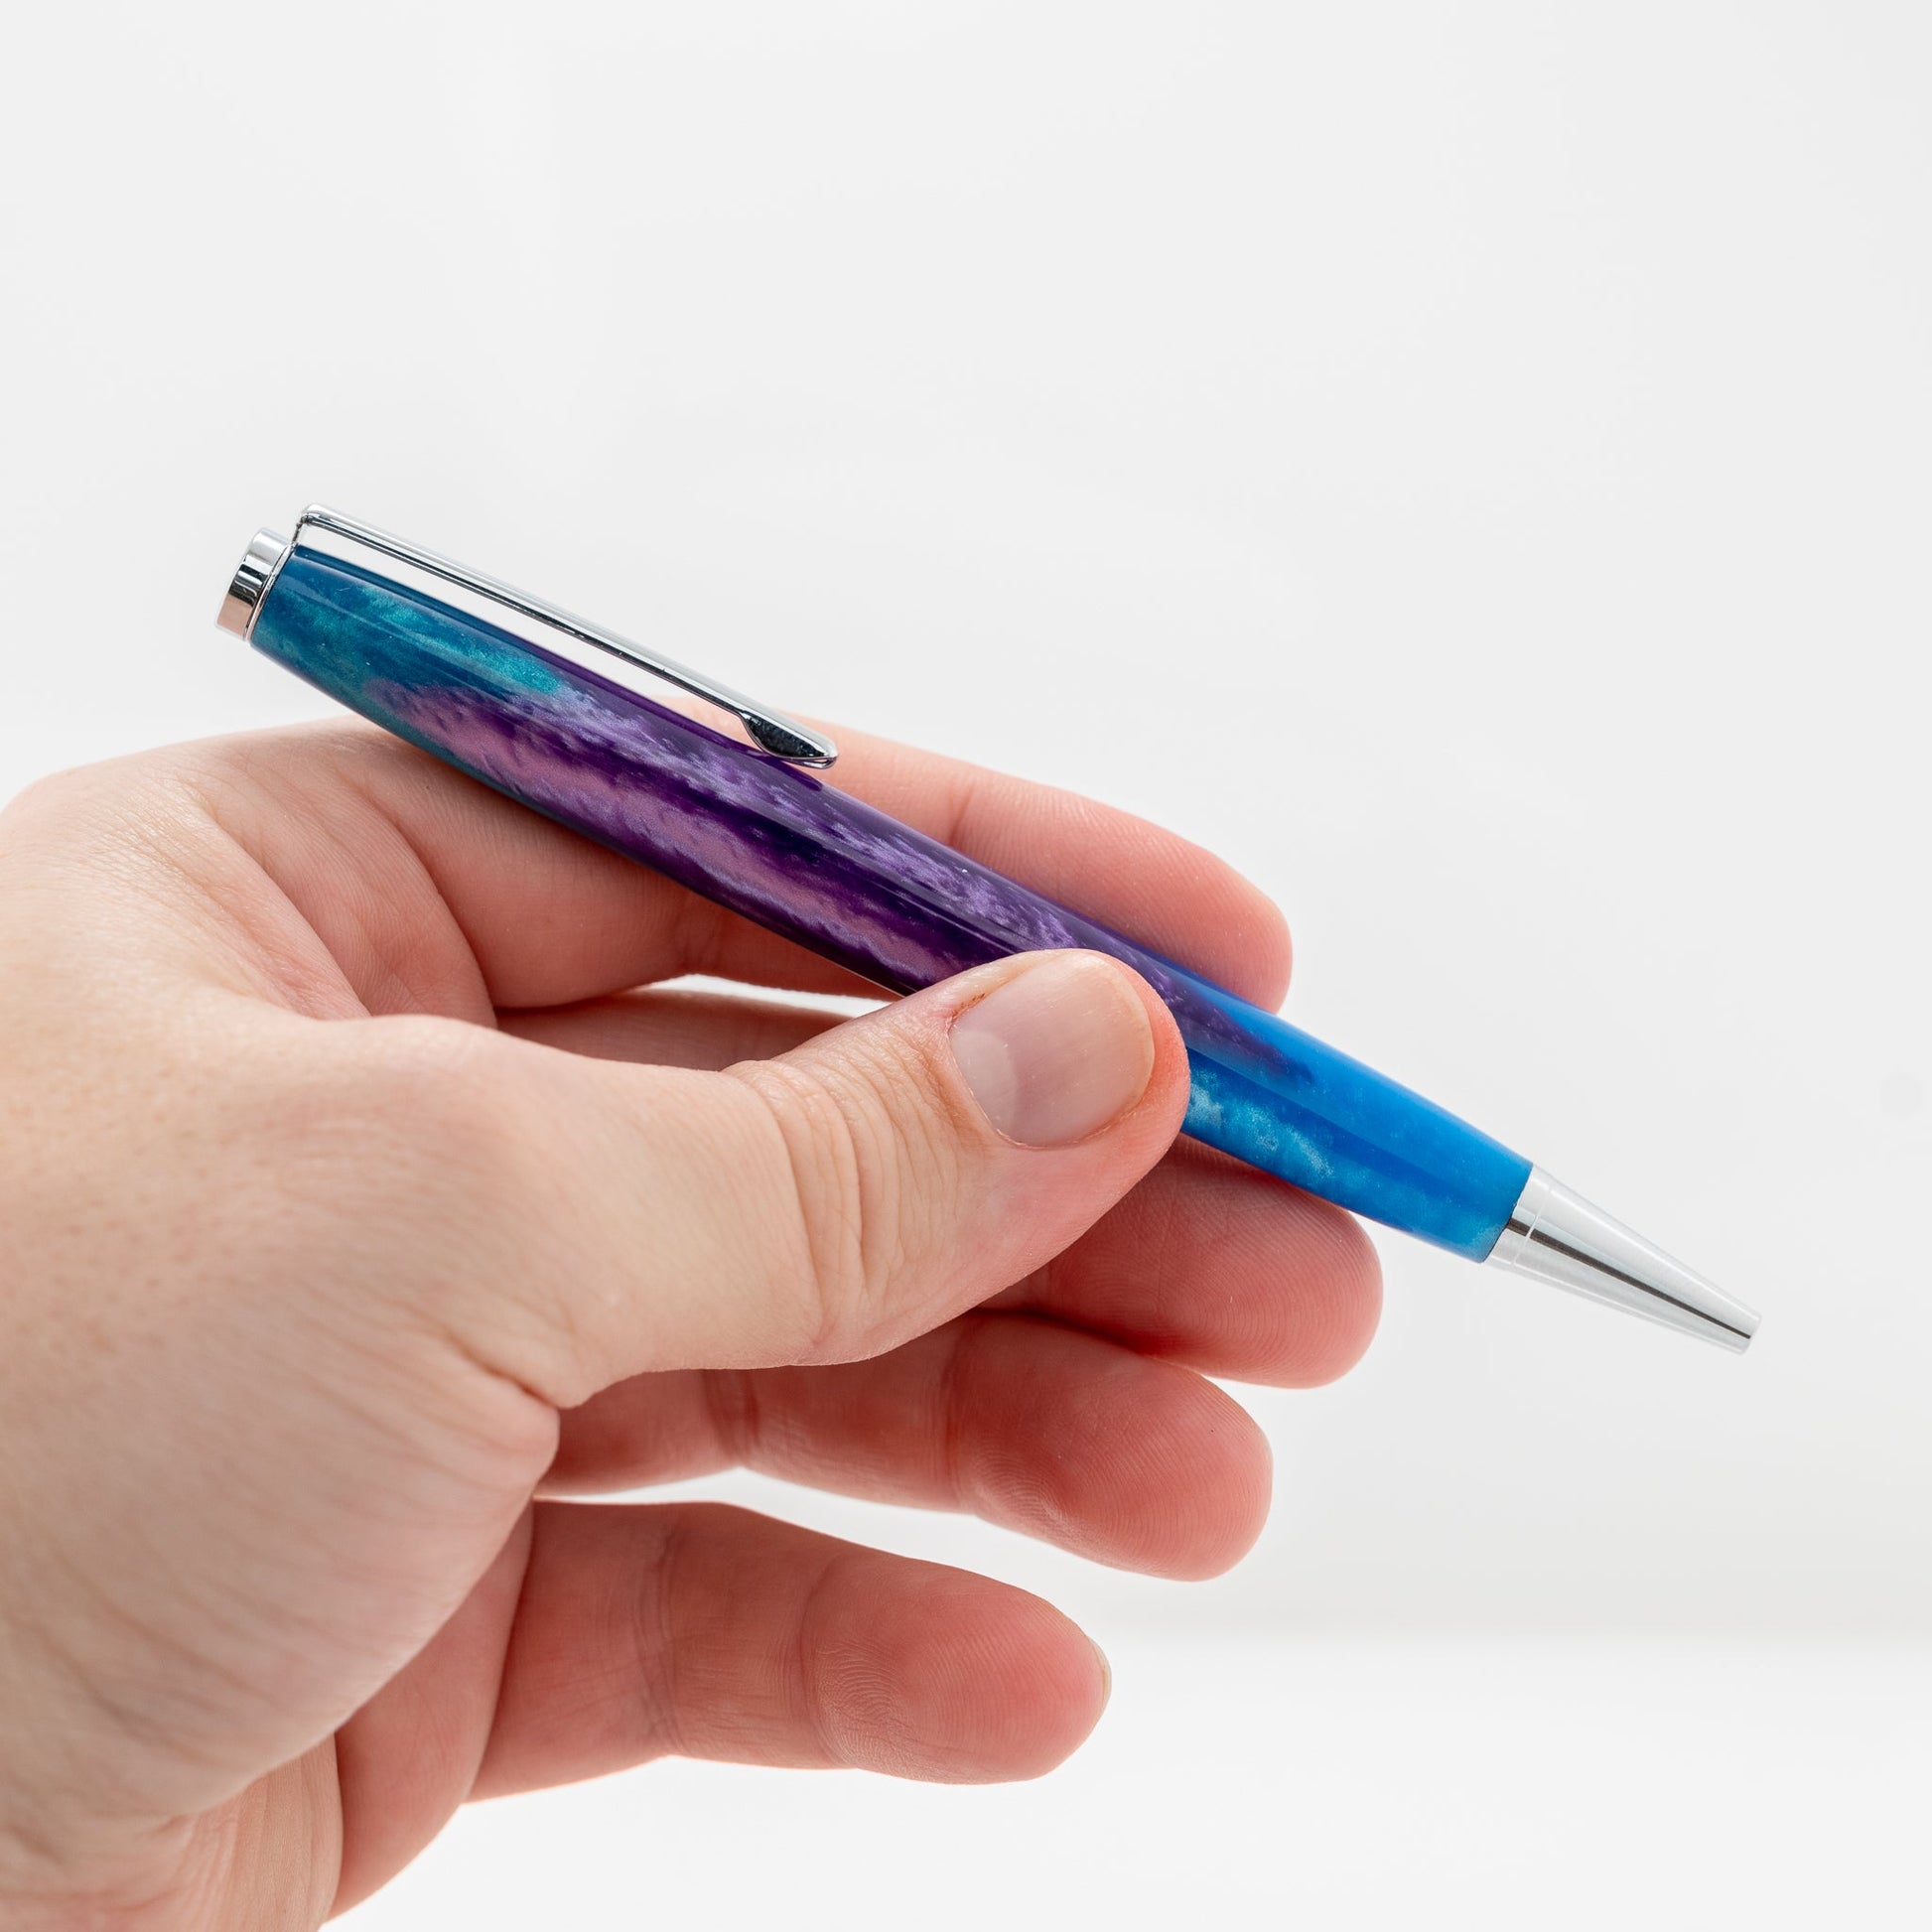 Handmade blue and purple resin modified ballpoint twist pen with chrome plating